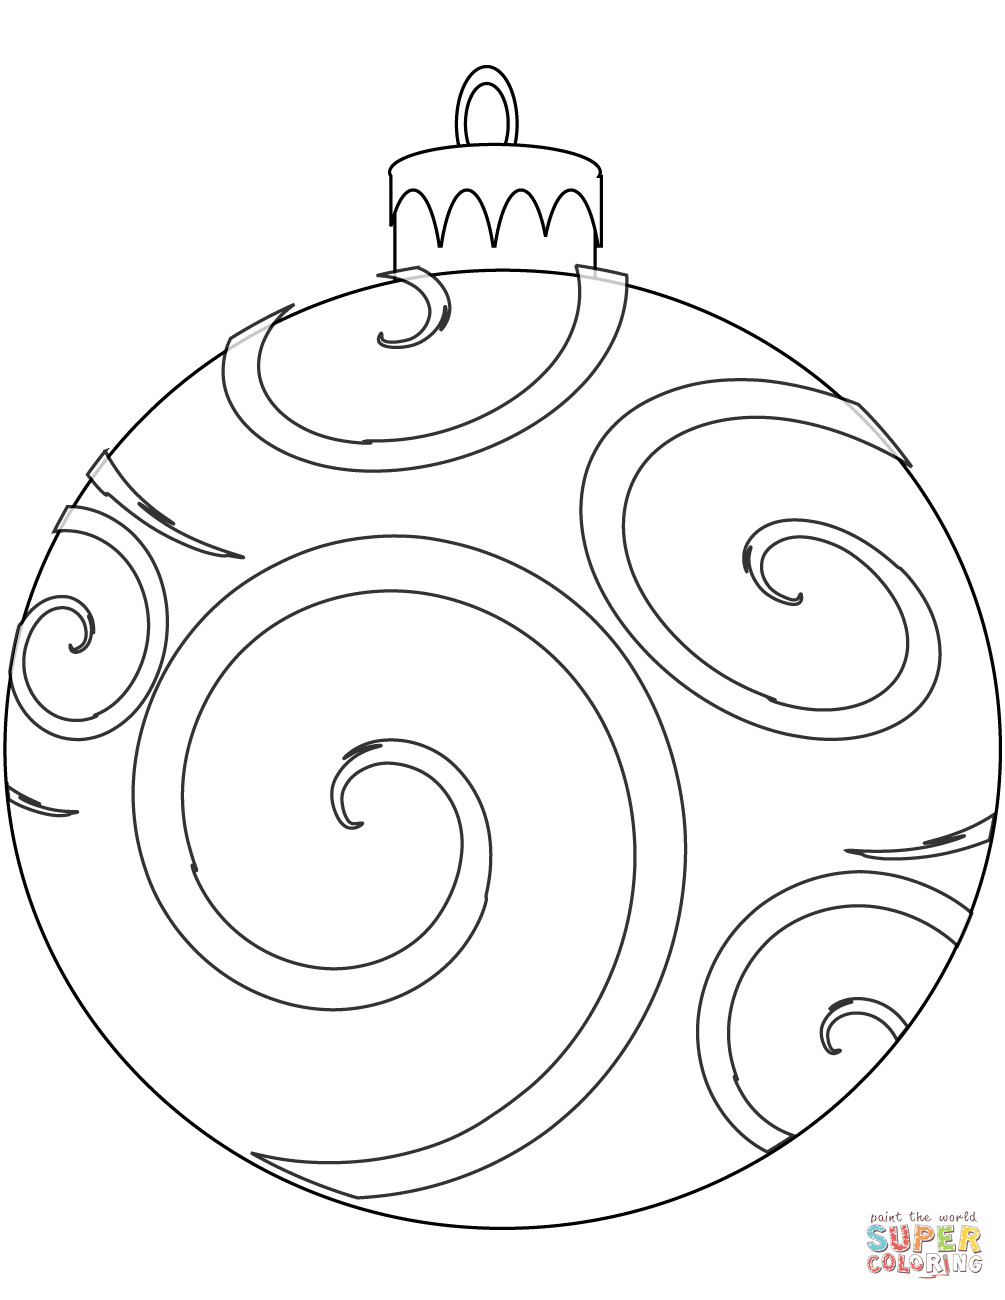 Christmas Ornaments Coloring Pages Printable
 Holiday Ornament coloring page